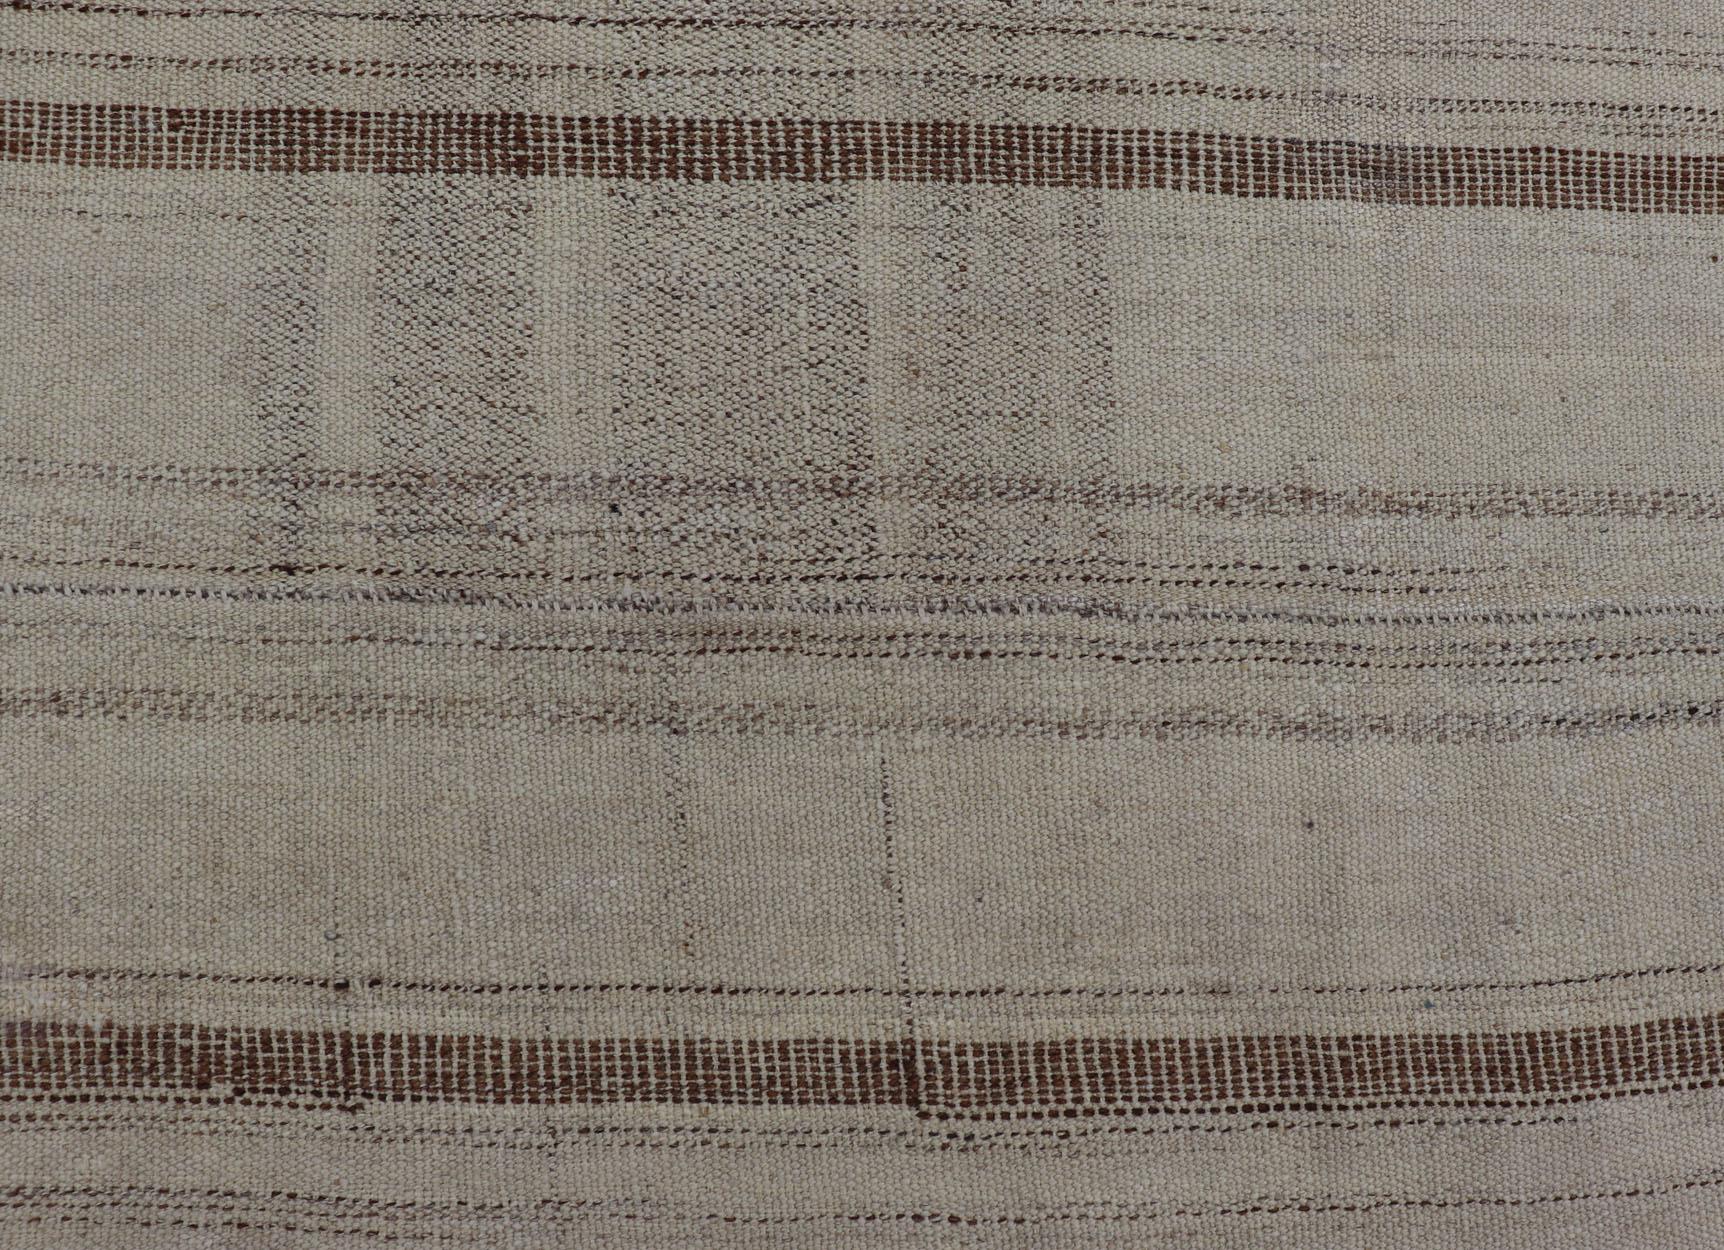 Wool Vintage Hand Woven Turkish Kilim with Stripes in Taupe, Cream & Brown For Sale